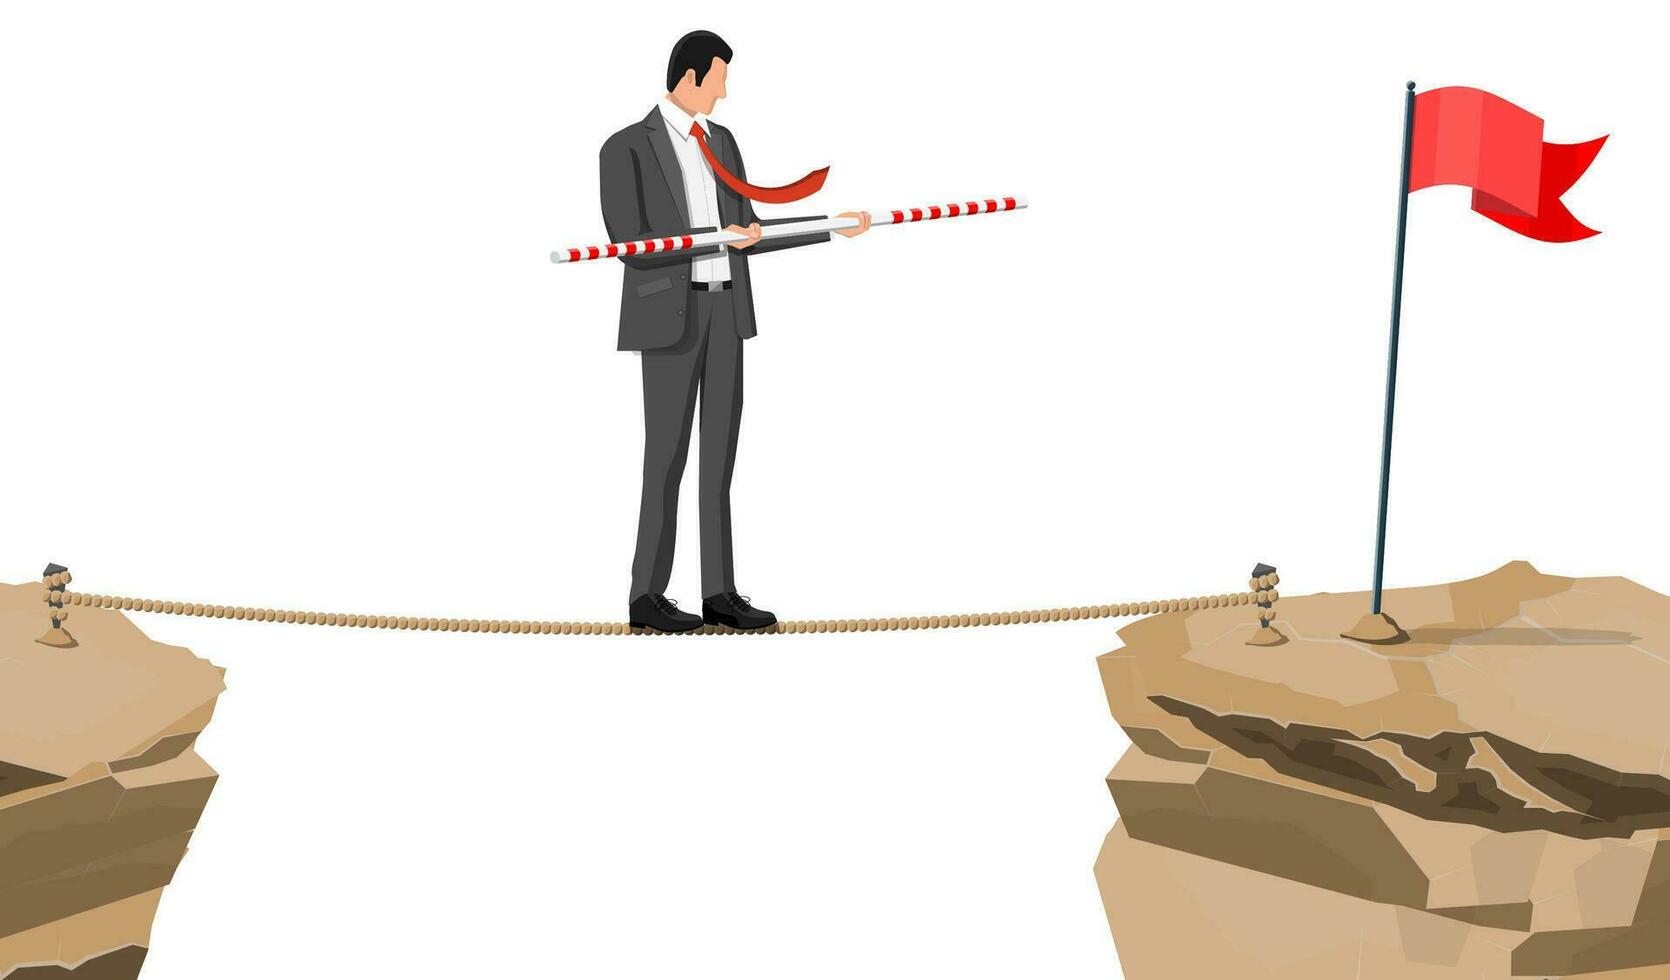 Businessman in suit walking on rope with balancer stick. Business man walking on tightrope gap. Obstacle on road, financial crisis. Risk management challenge. Vector illustration in flat style